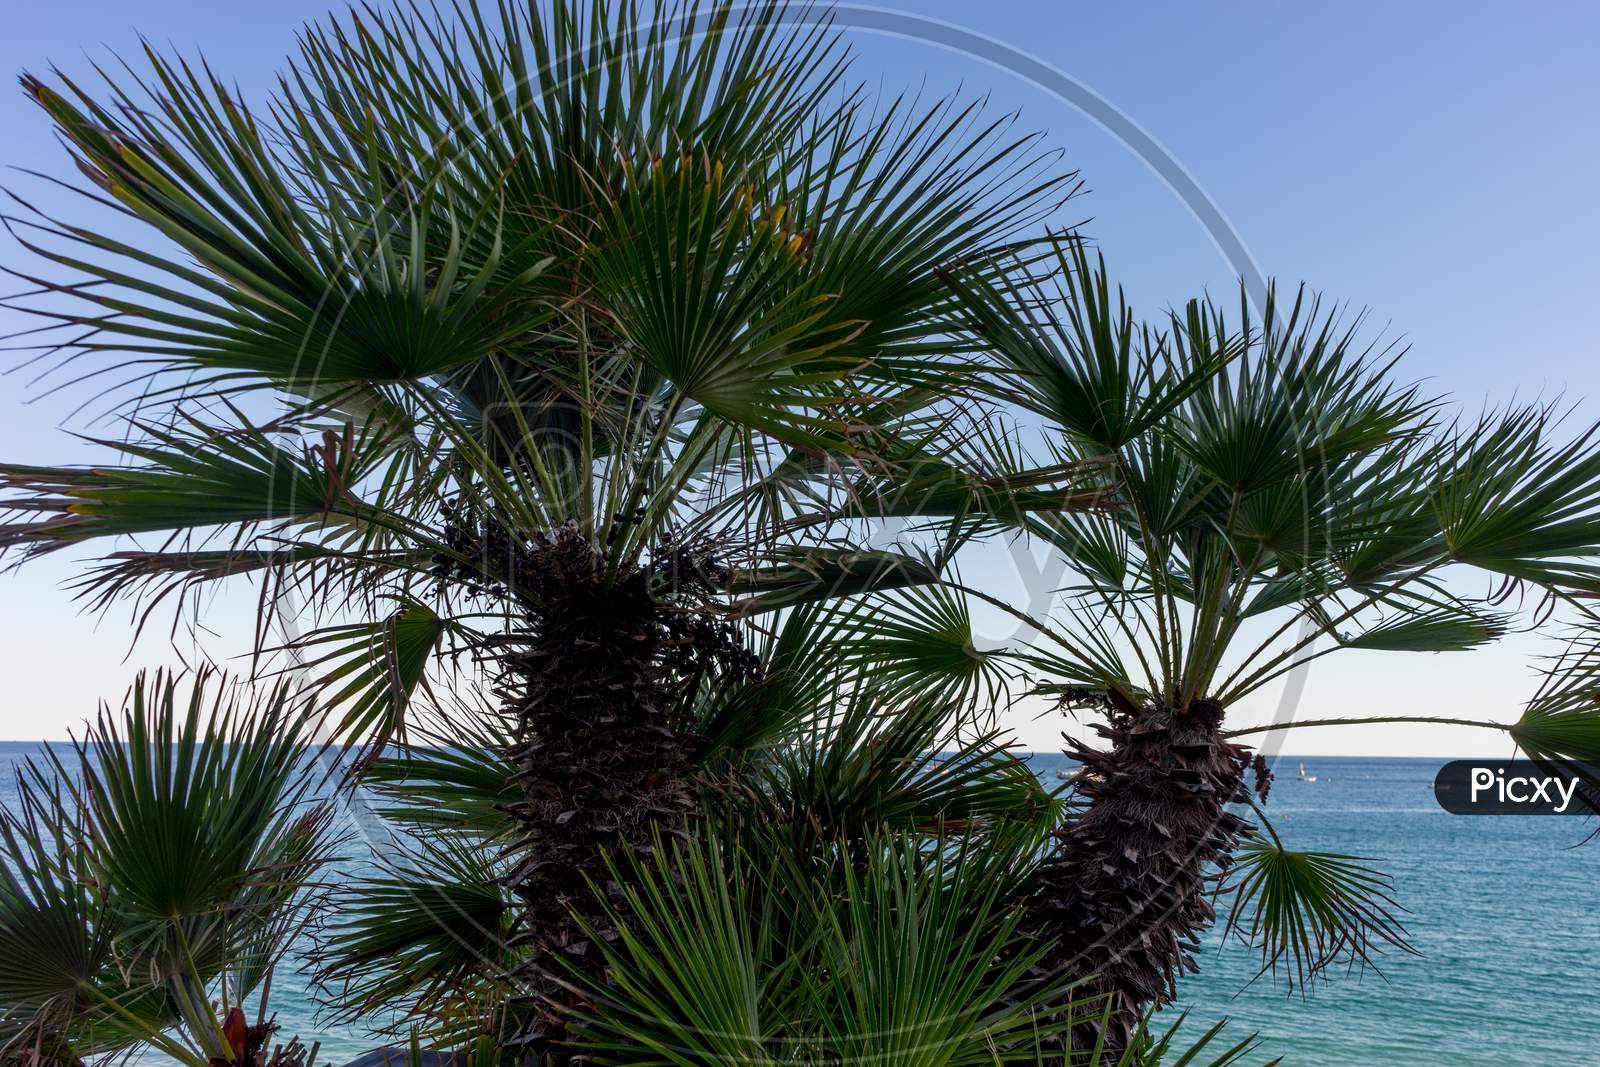 Italy, Cinque Terre, Monterosso, A Group Of Palm Trees Next To A Tree